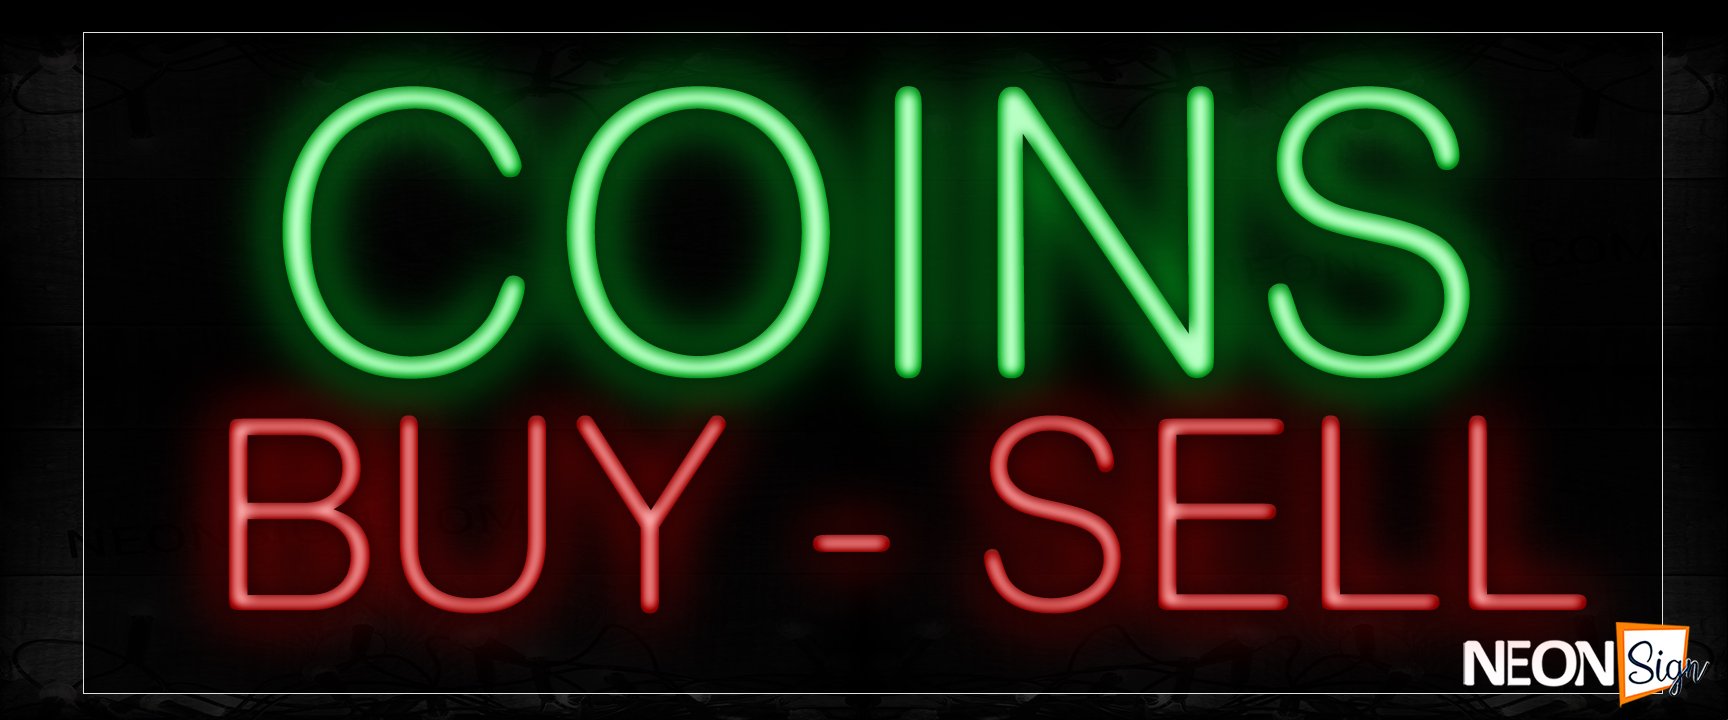 Image of 12332 Coins By-Sell Neon Signs_10x24 Black Backing